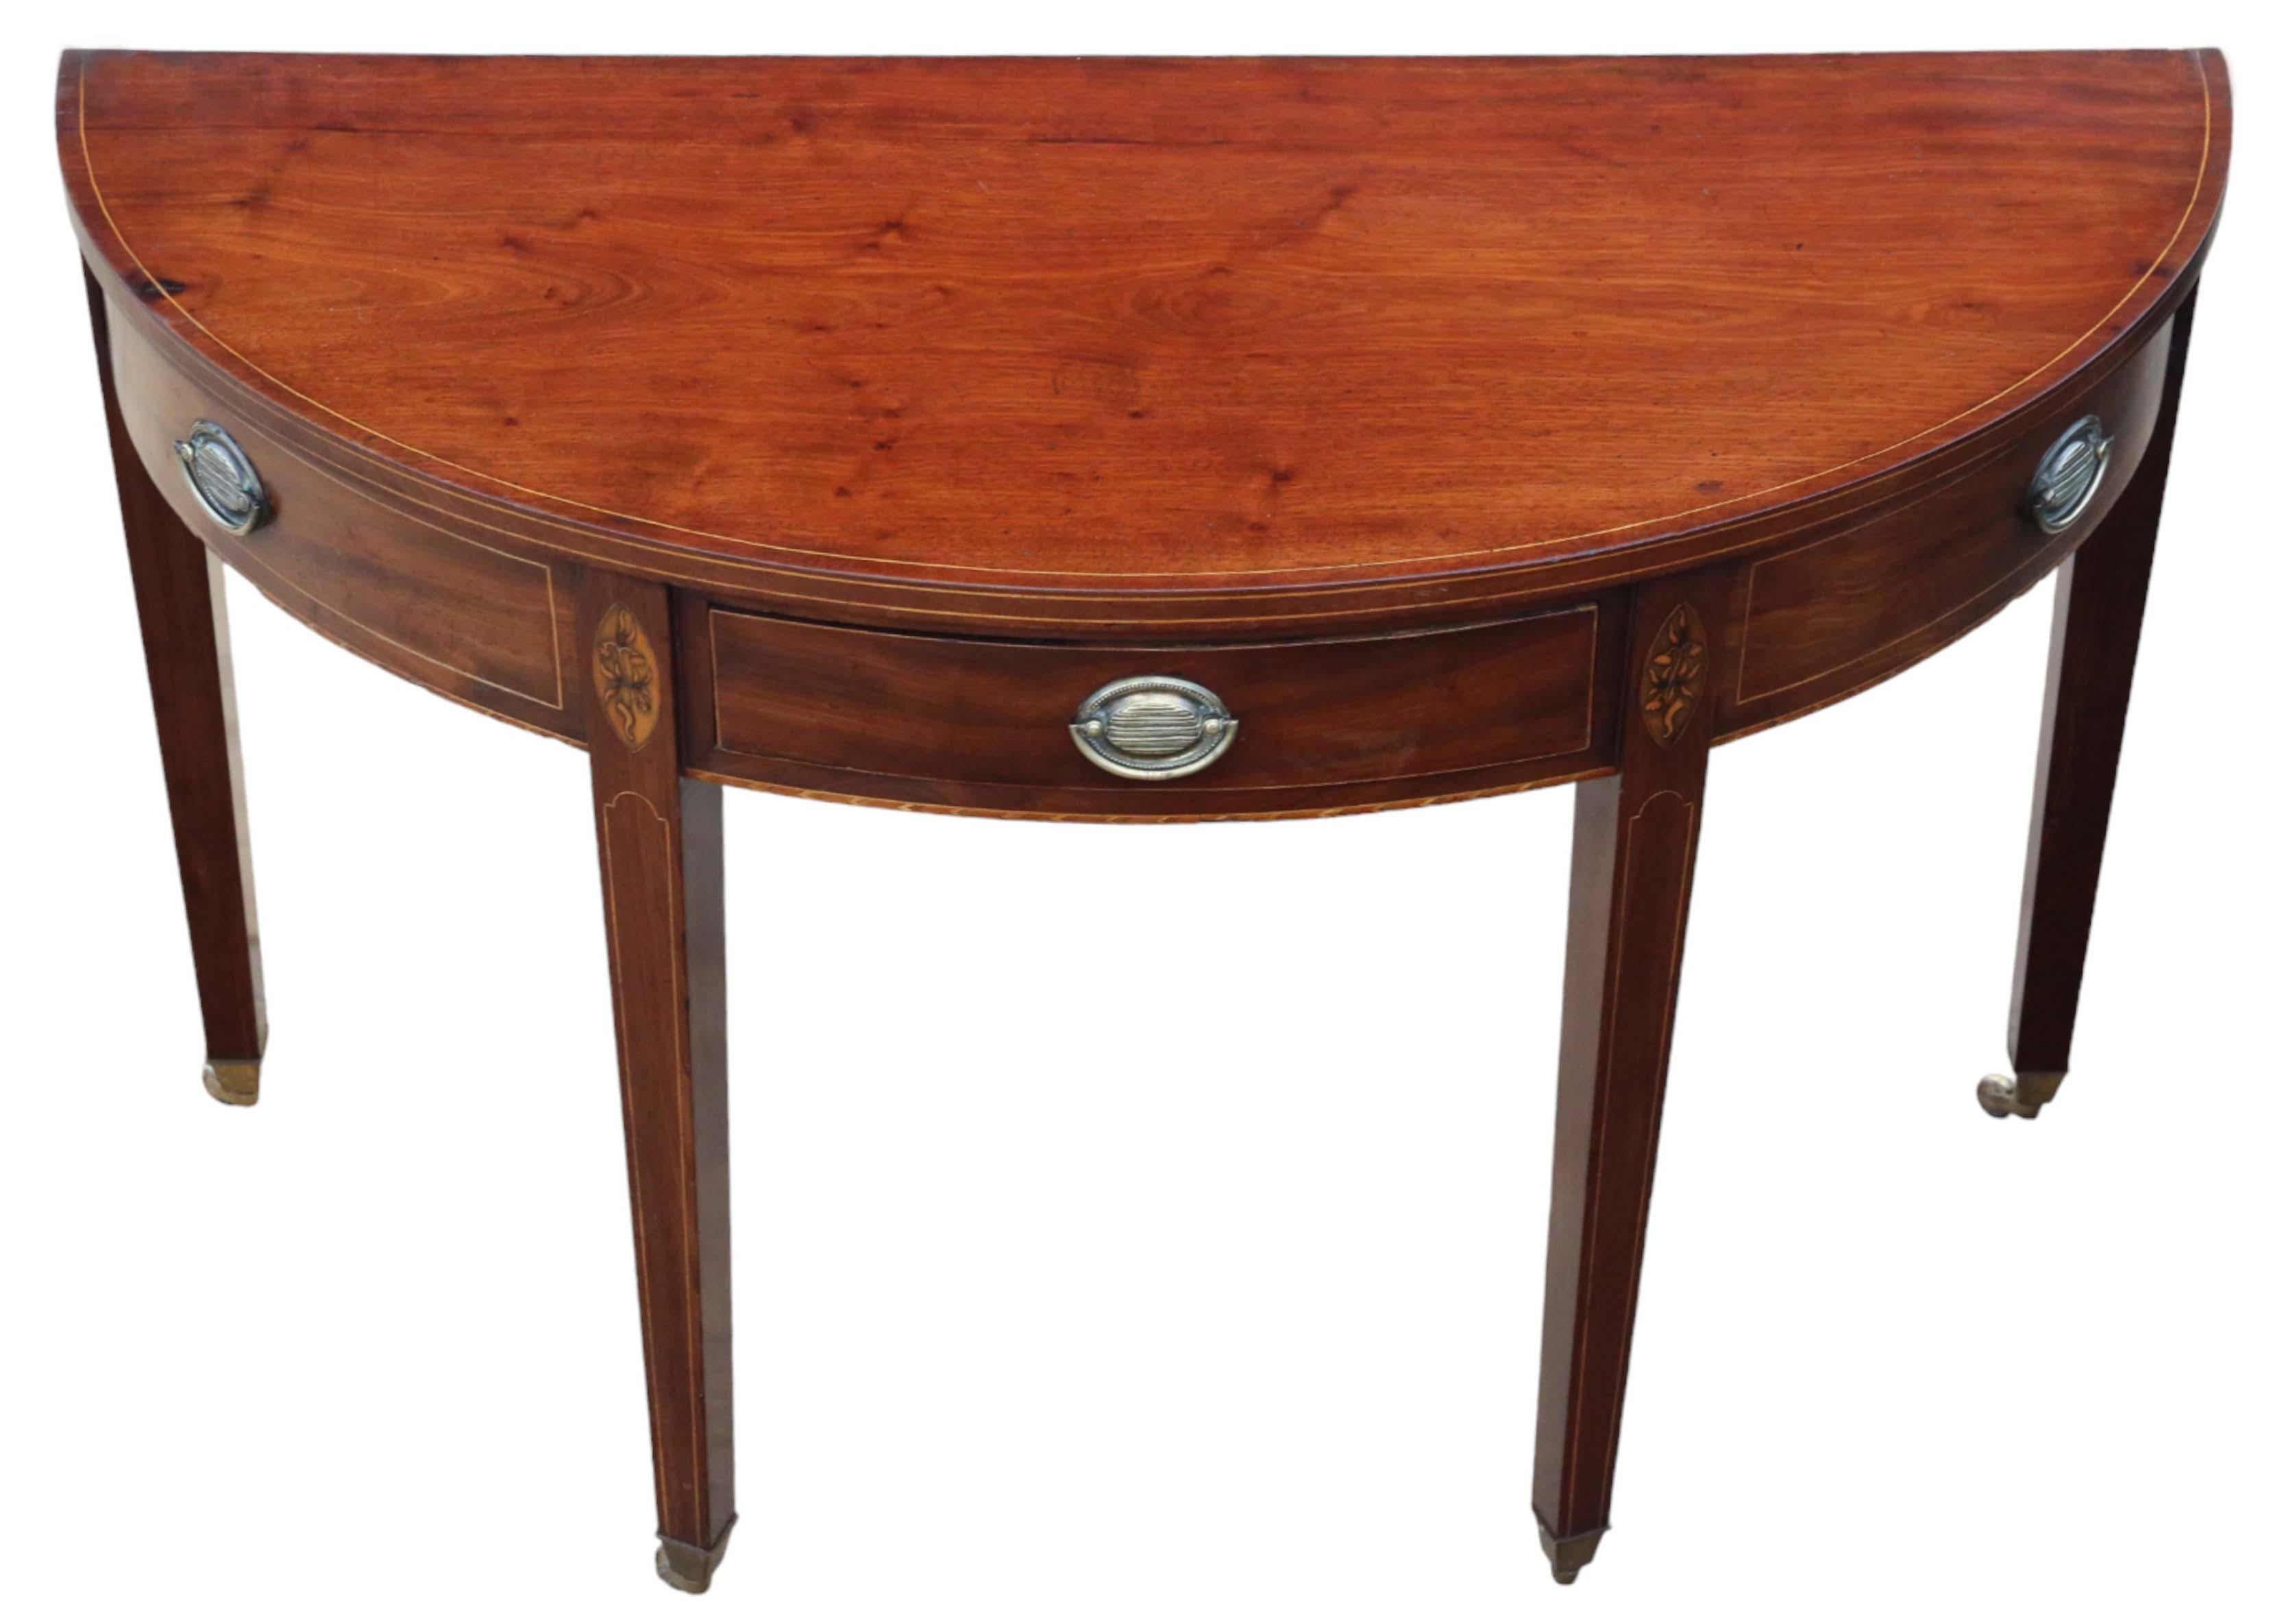 Antique early 19th Century inlaid mahogany demi-lune console table.

This table is a delightful piece, exuding age, charm, and character—a very rare decorative find.

Featuring a central drawer and two dummy side drawers, it is solid with no loose